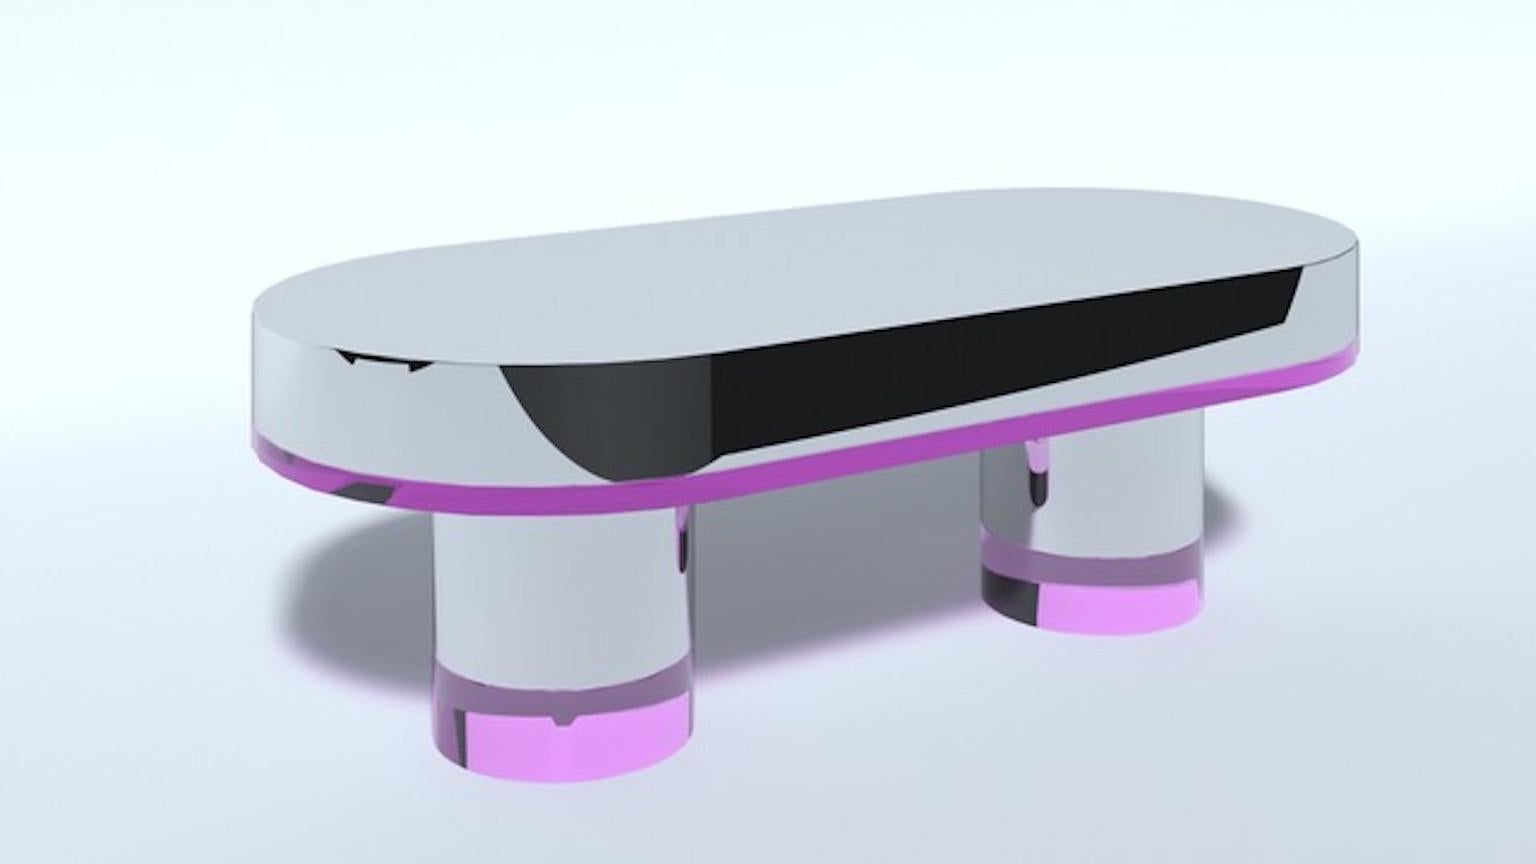 Dolmen model coffee table, legs and top in stainless steel and feet of the two legs in colored plexiglas designed by Studio Superego for Superego Editions. Limited edition of 9 pieces.

Biography:
Superego editions was born in 2006, performing a